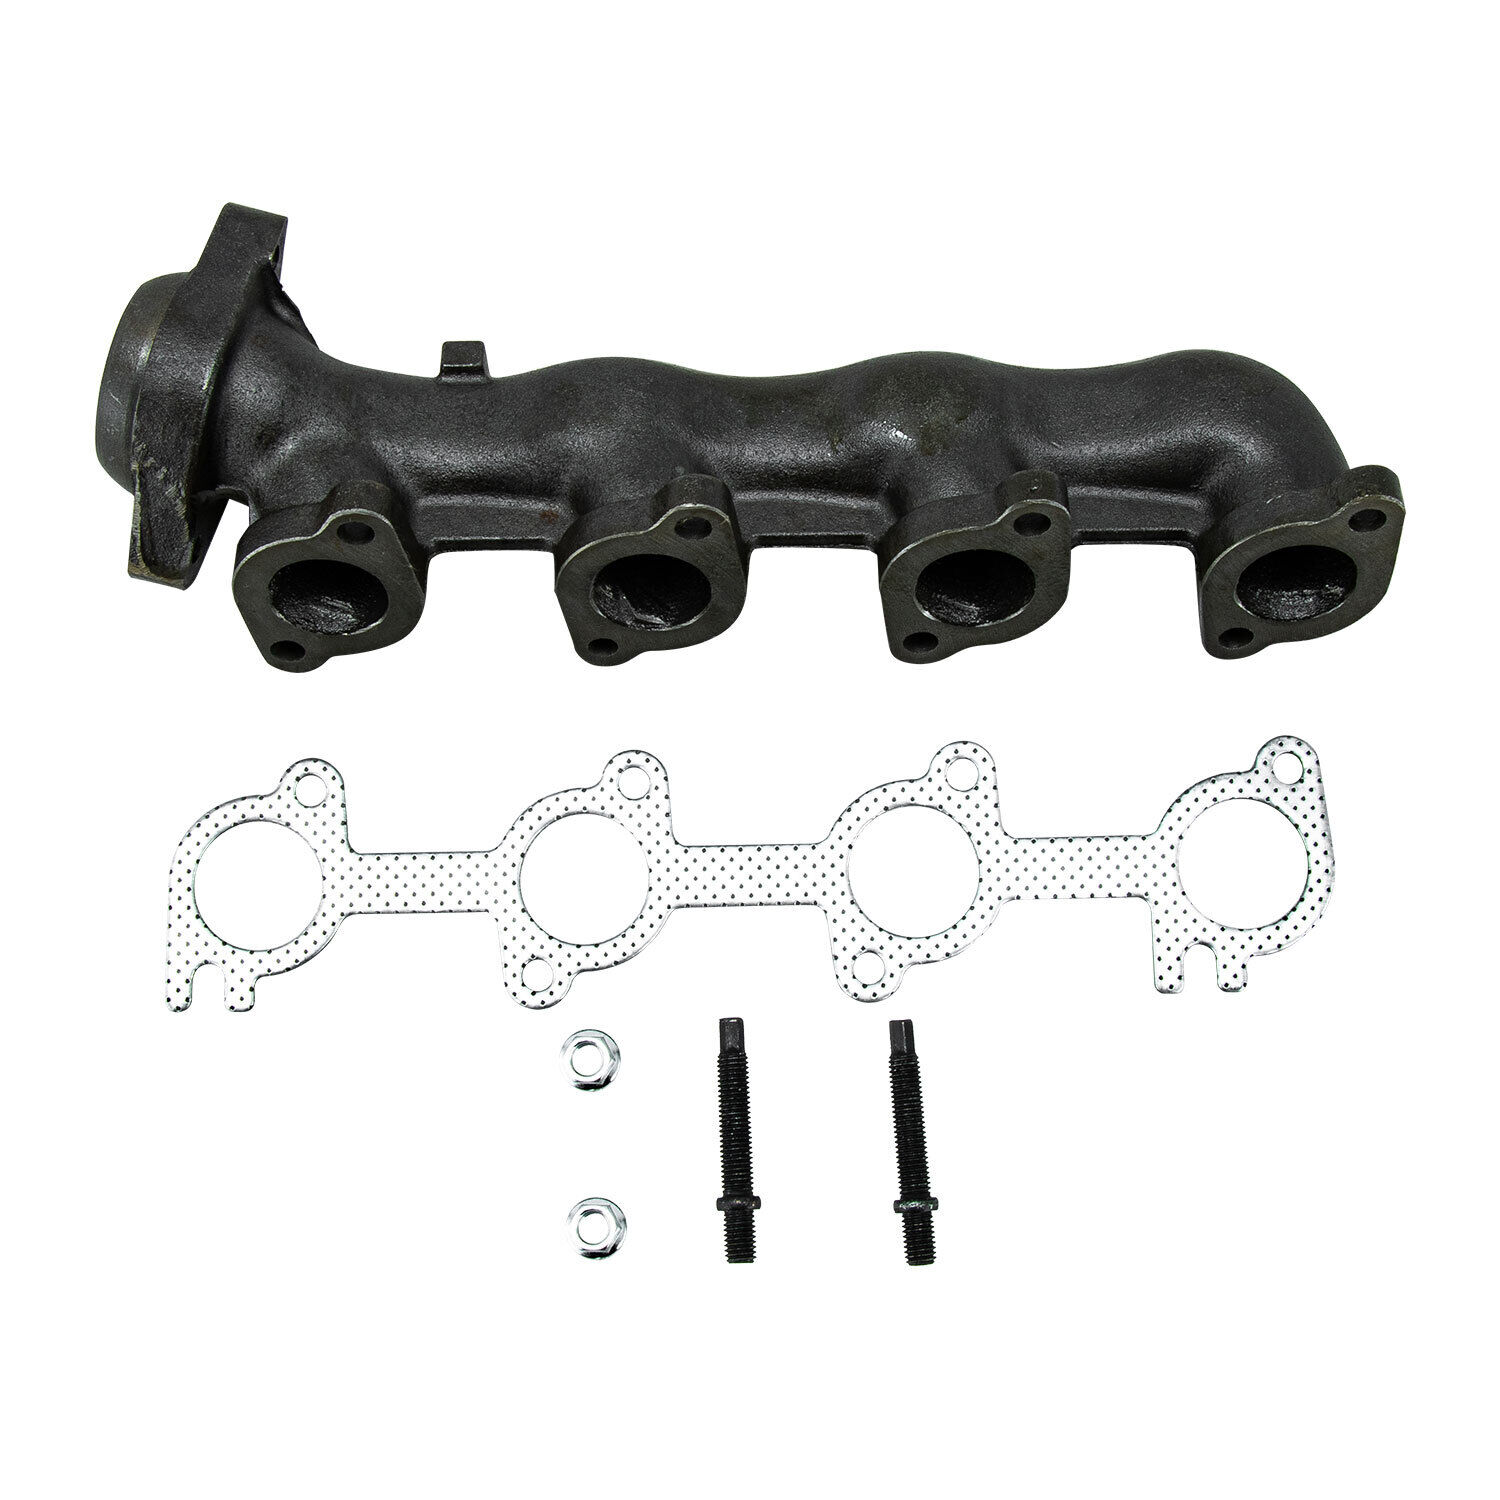 Right Exhaust Manifold w/Gasket Kit fits 1997-98 Ford Expedition F150 F250 Hot